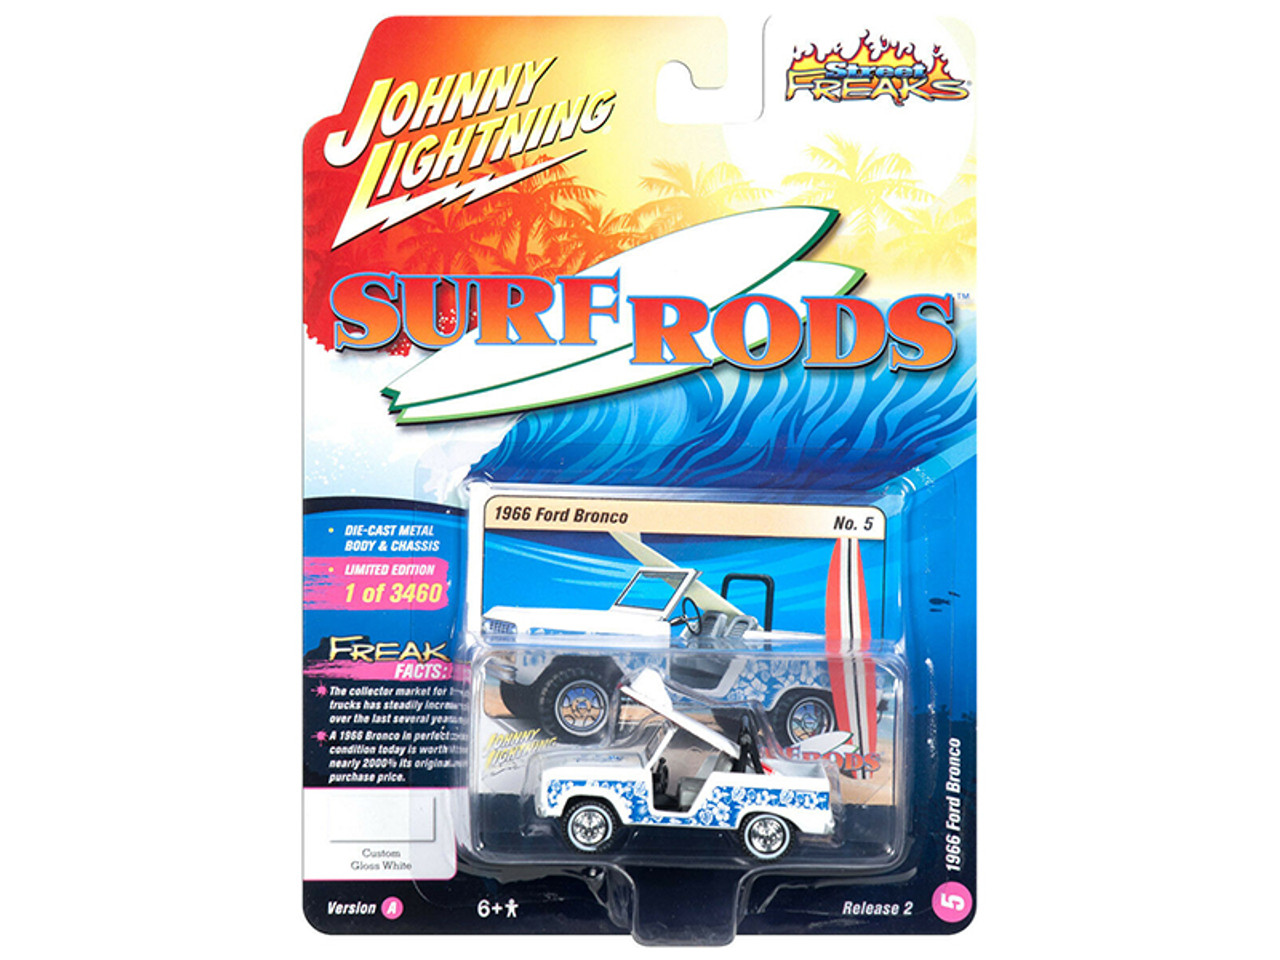 1966 Ford Bronco with Surf Board White and Blue Designs "Street Freaks" Limited Edition to 3,460 pieces Worldwide 1/64 Diecast Model Car by Johnny Lightning